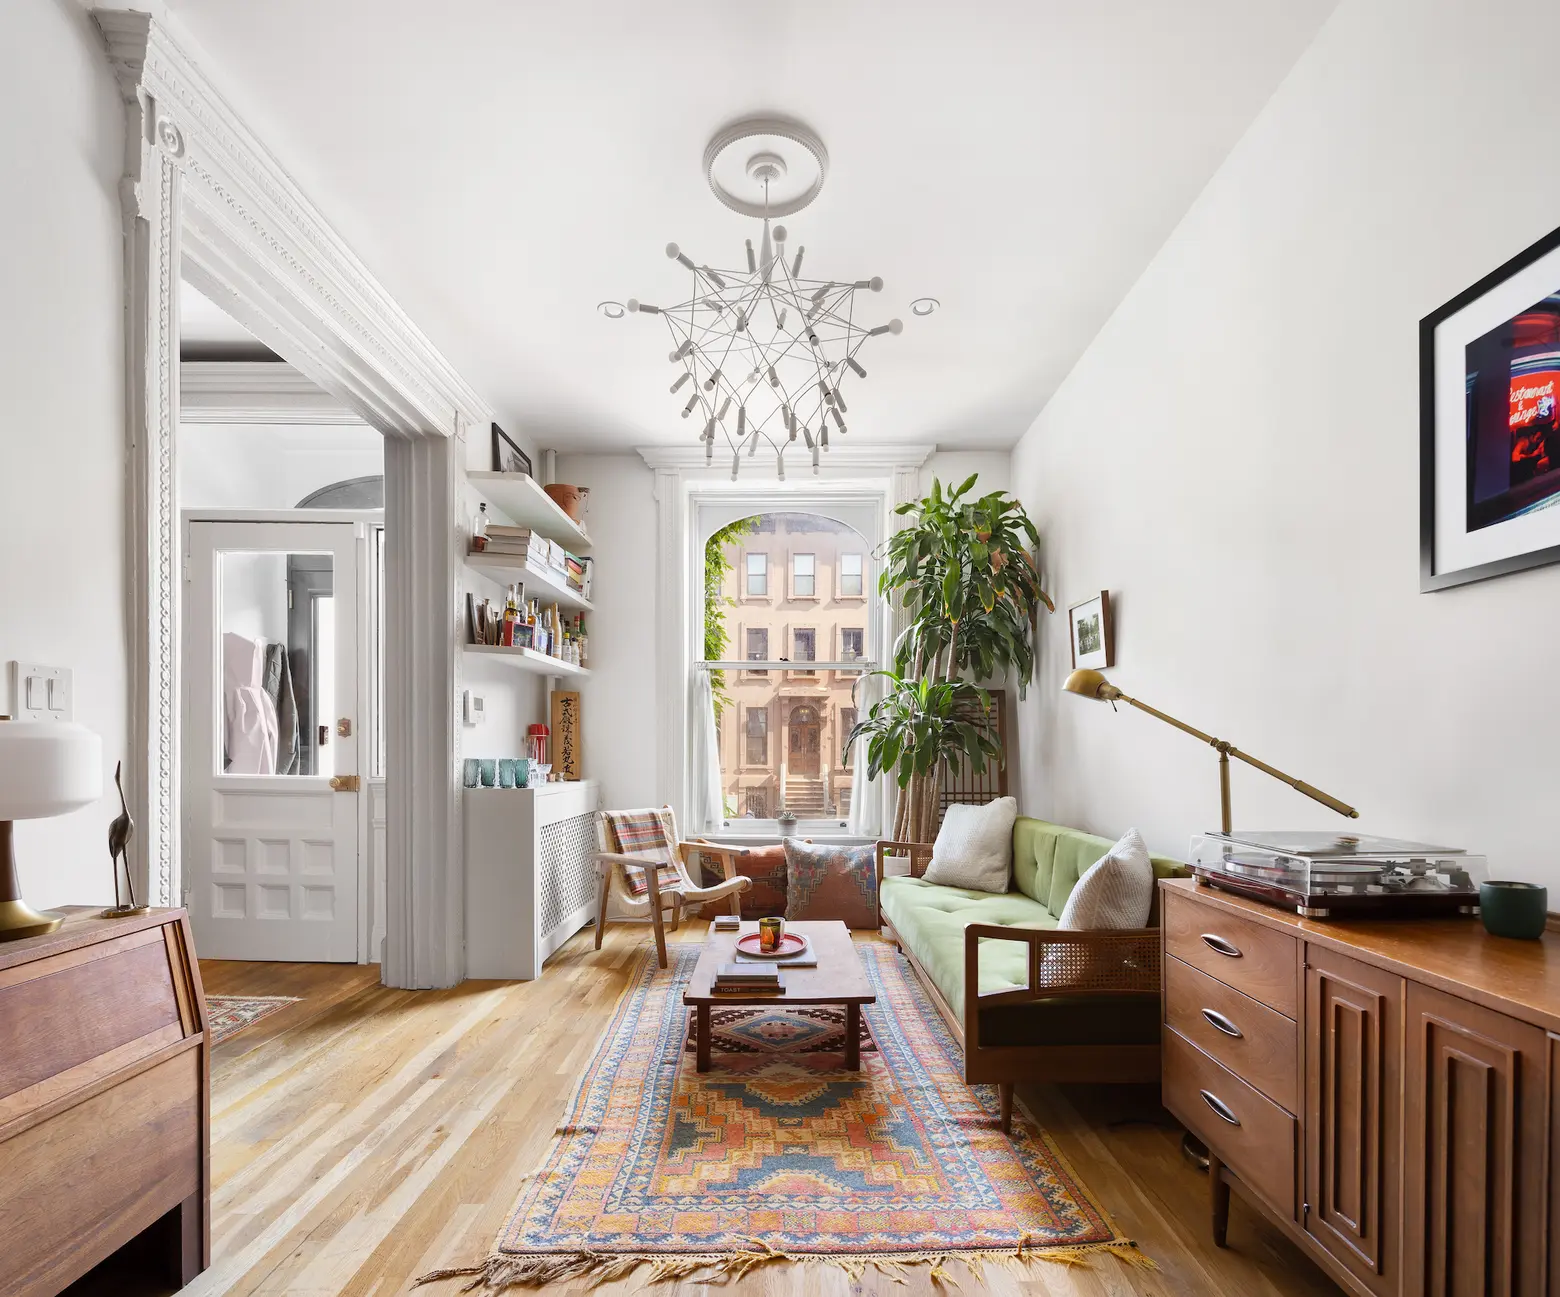 Queen Anne townhouse in Fort Greene has lovely interiors and a garden apartment for $2.5M